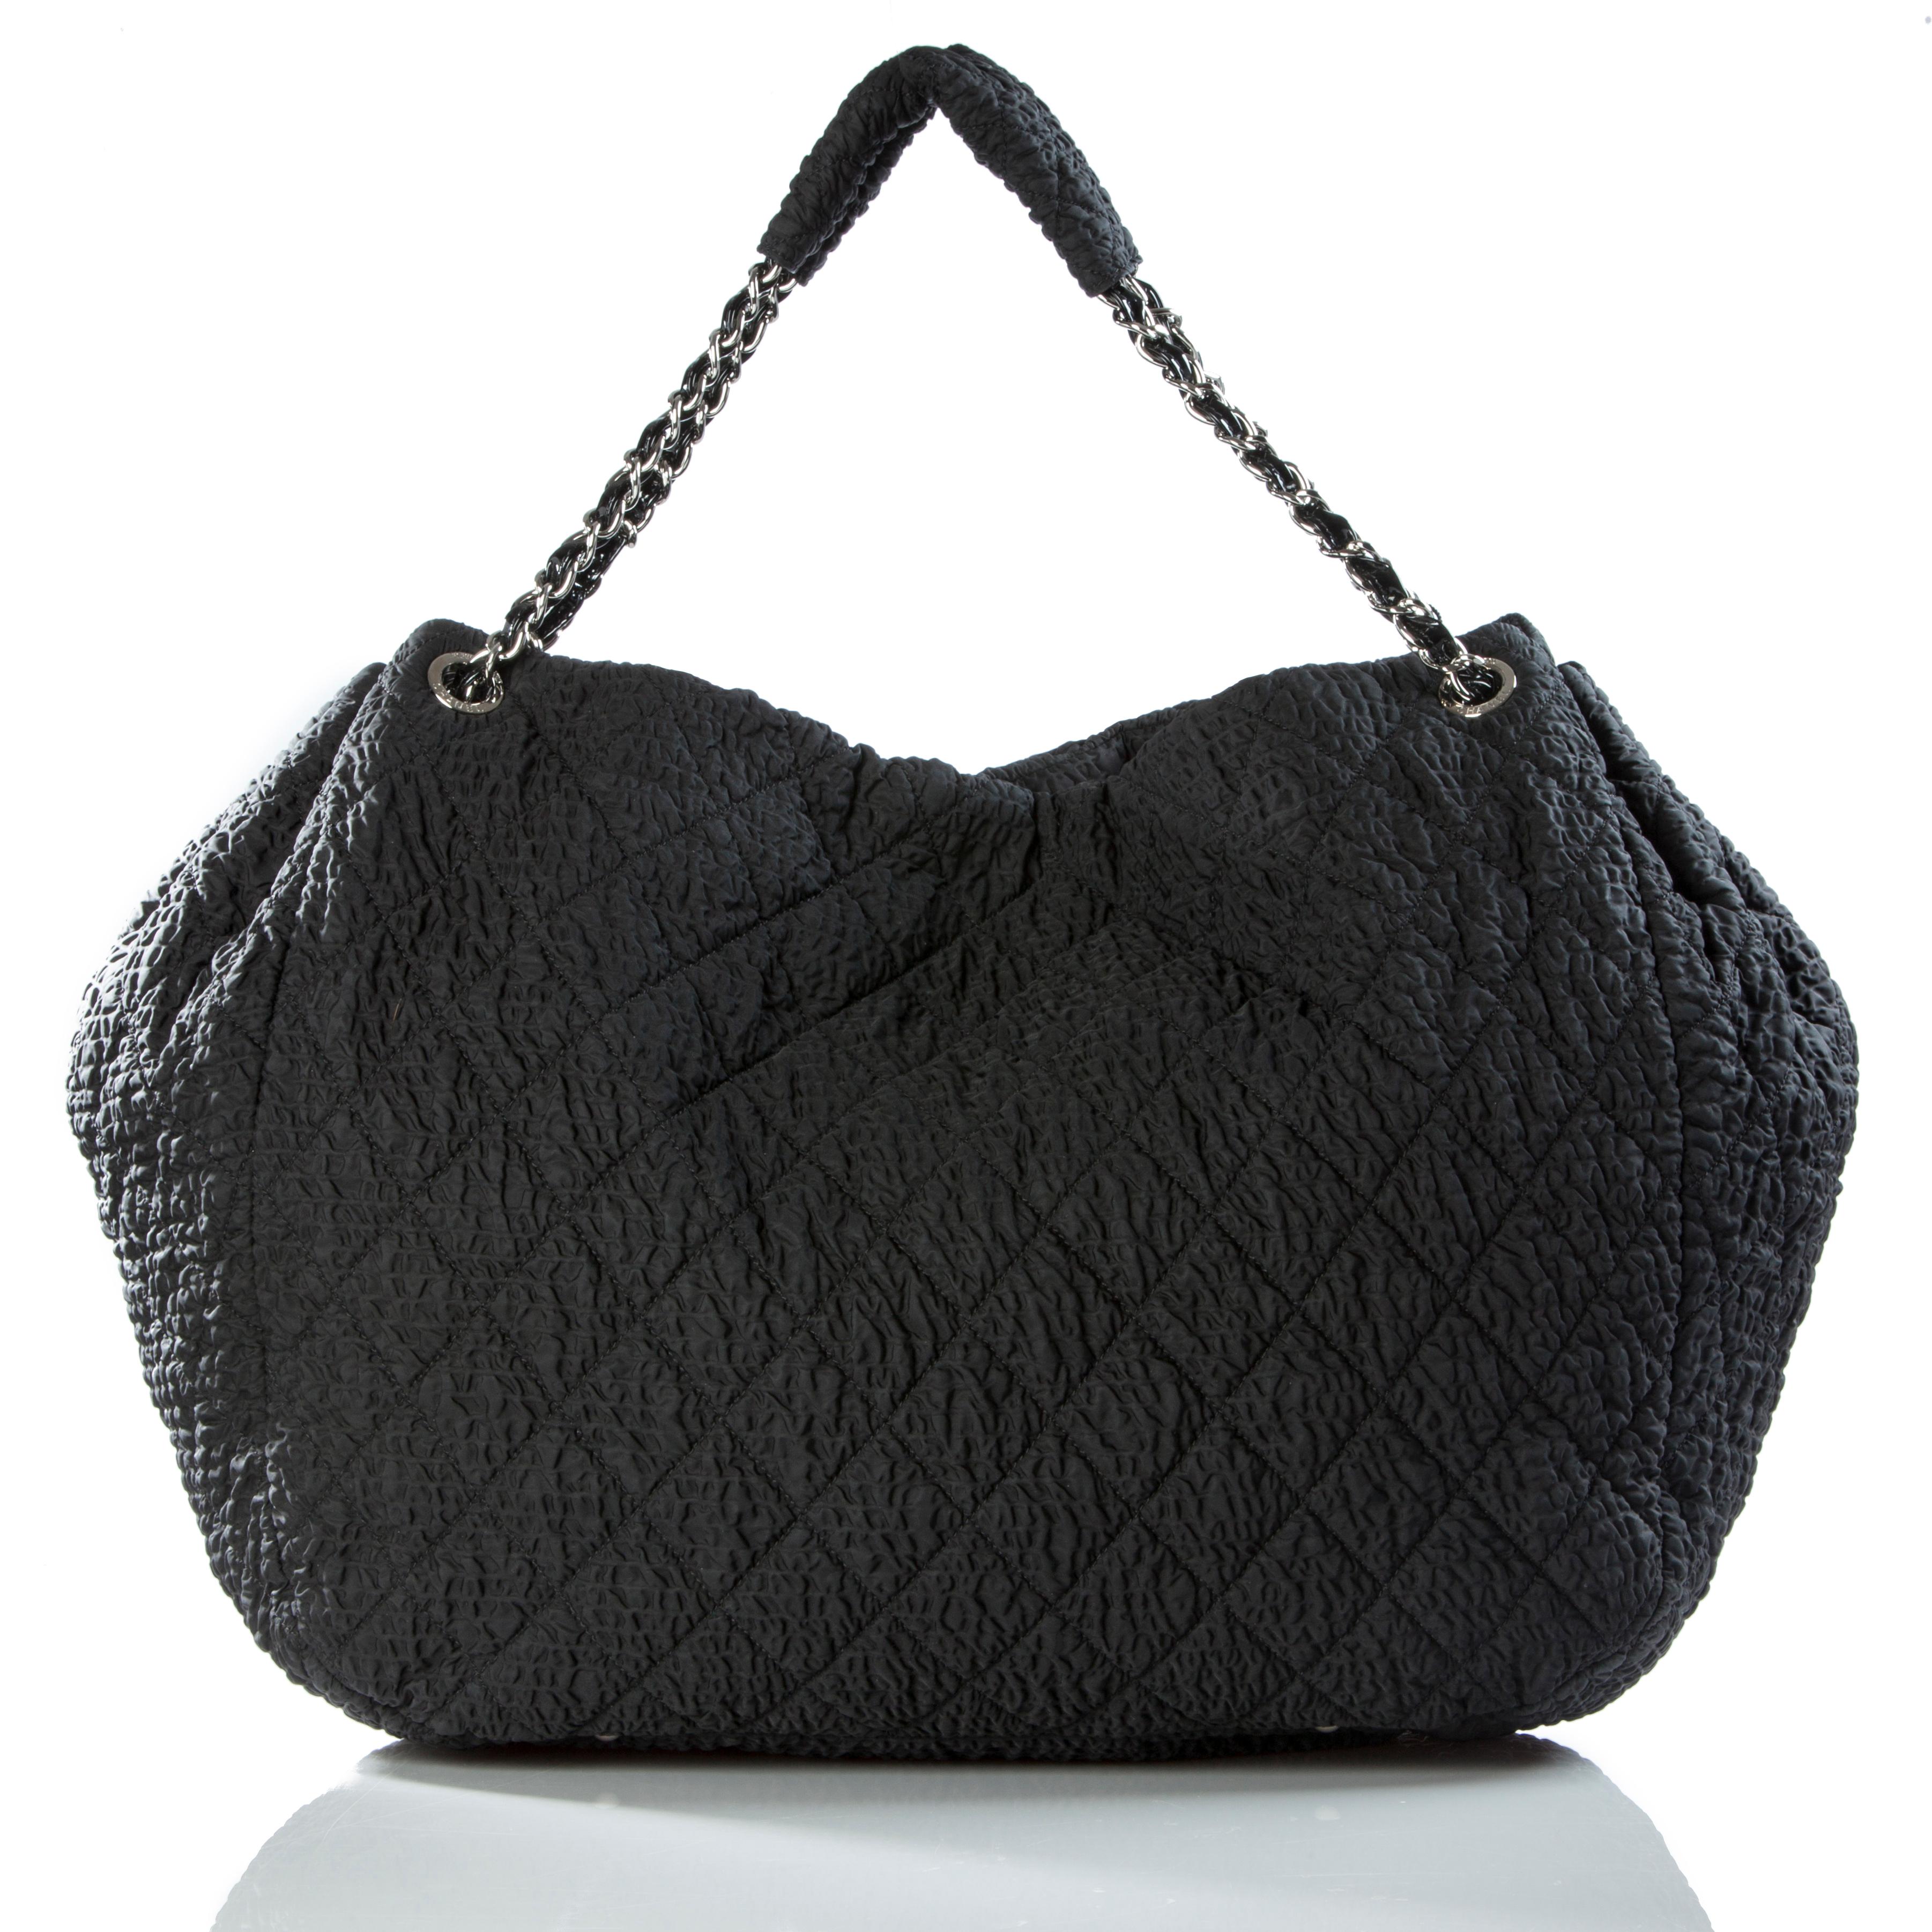 Chanel Coco Cabas Cabas Overnight Tote Black Microfiber Nylon Weekend Bag In Good Condition For Sale In Miami, FL